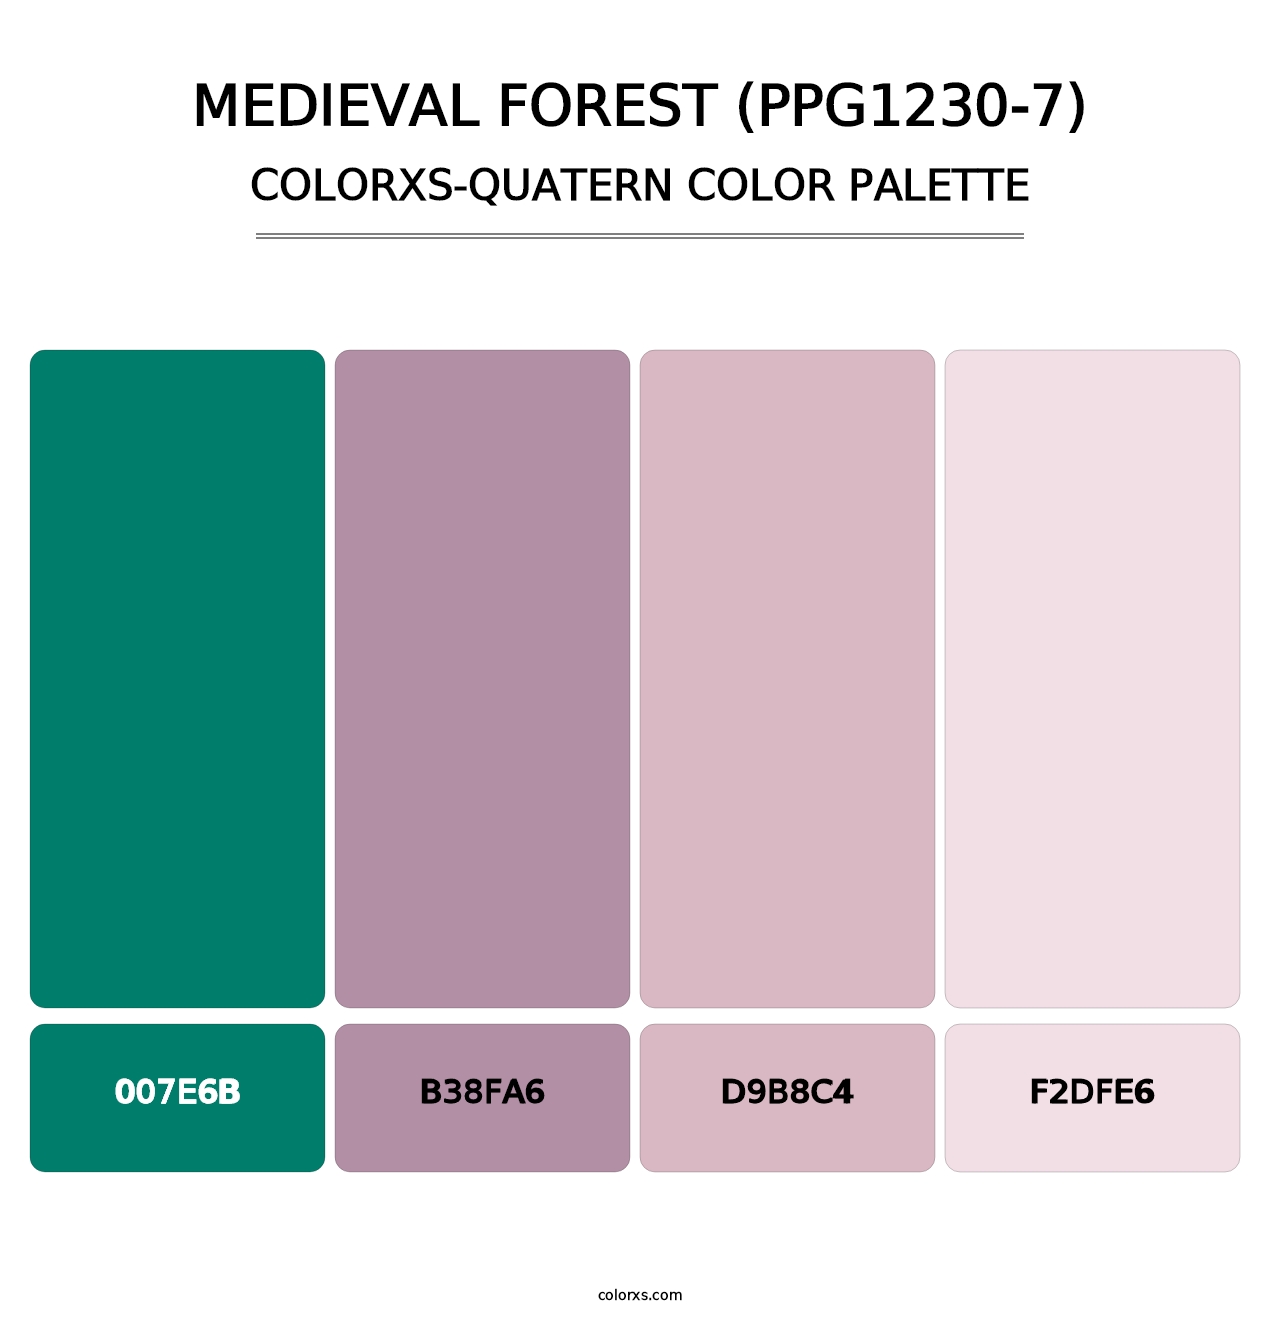 Medieval Forest (PPG1230-7) - Colorxs Quatern Palette